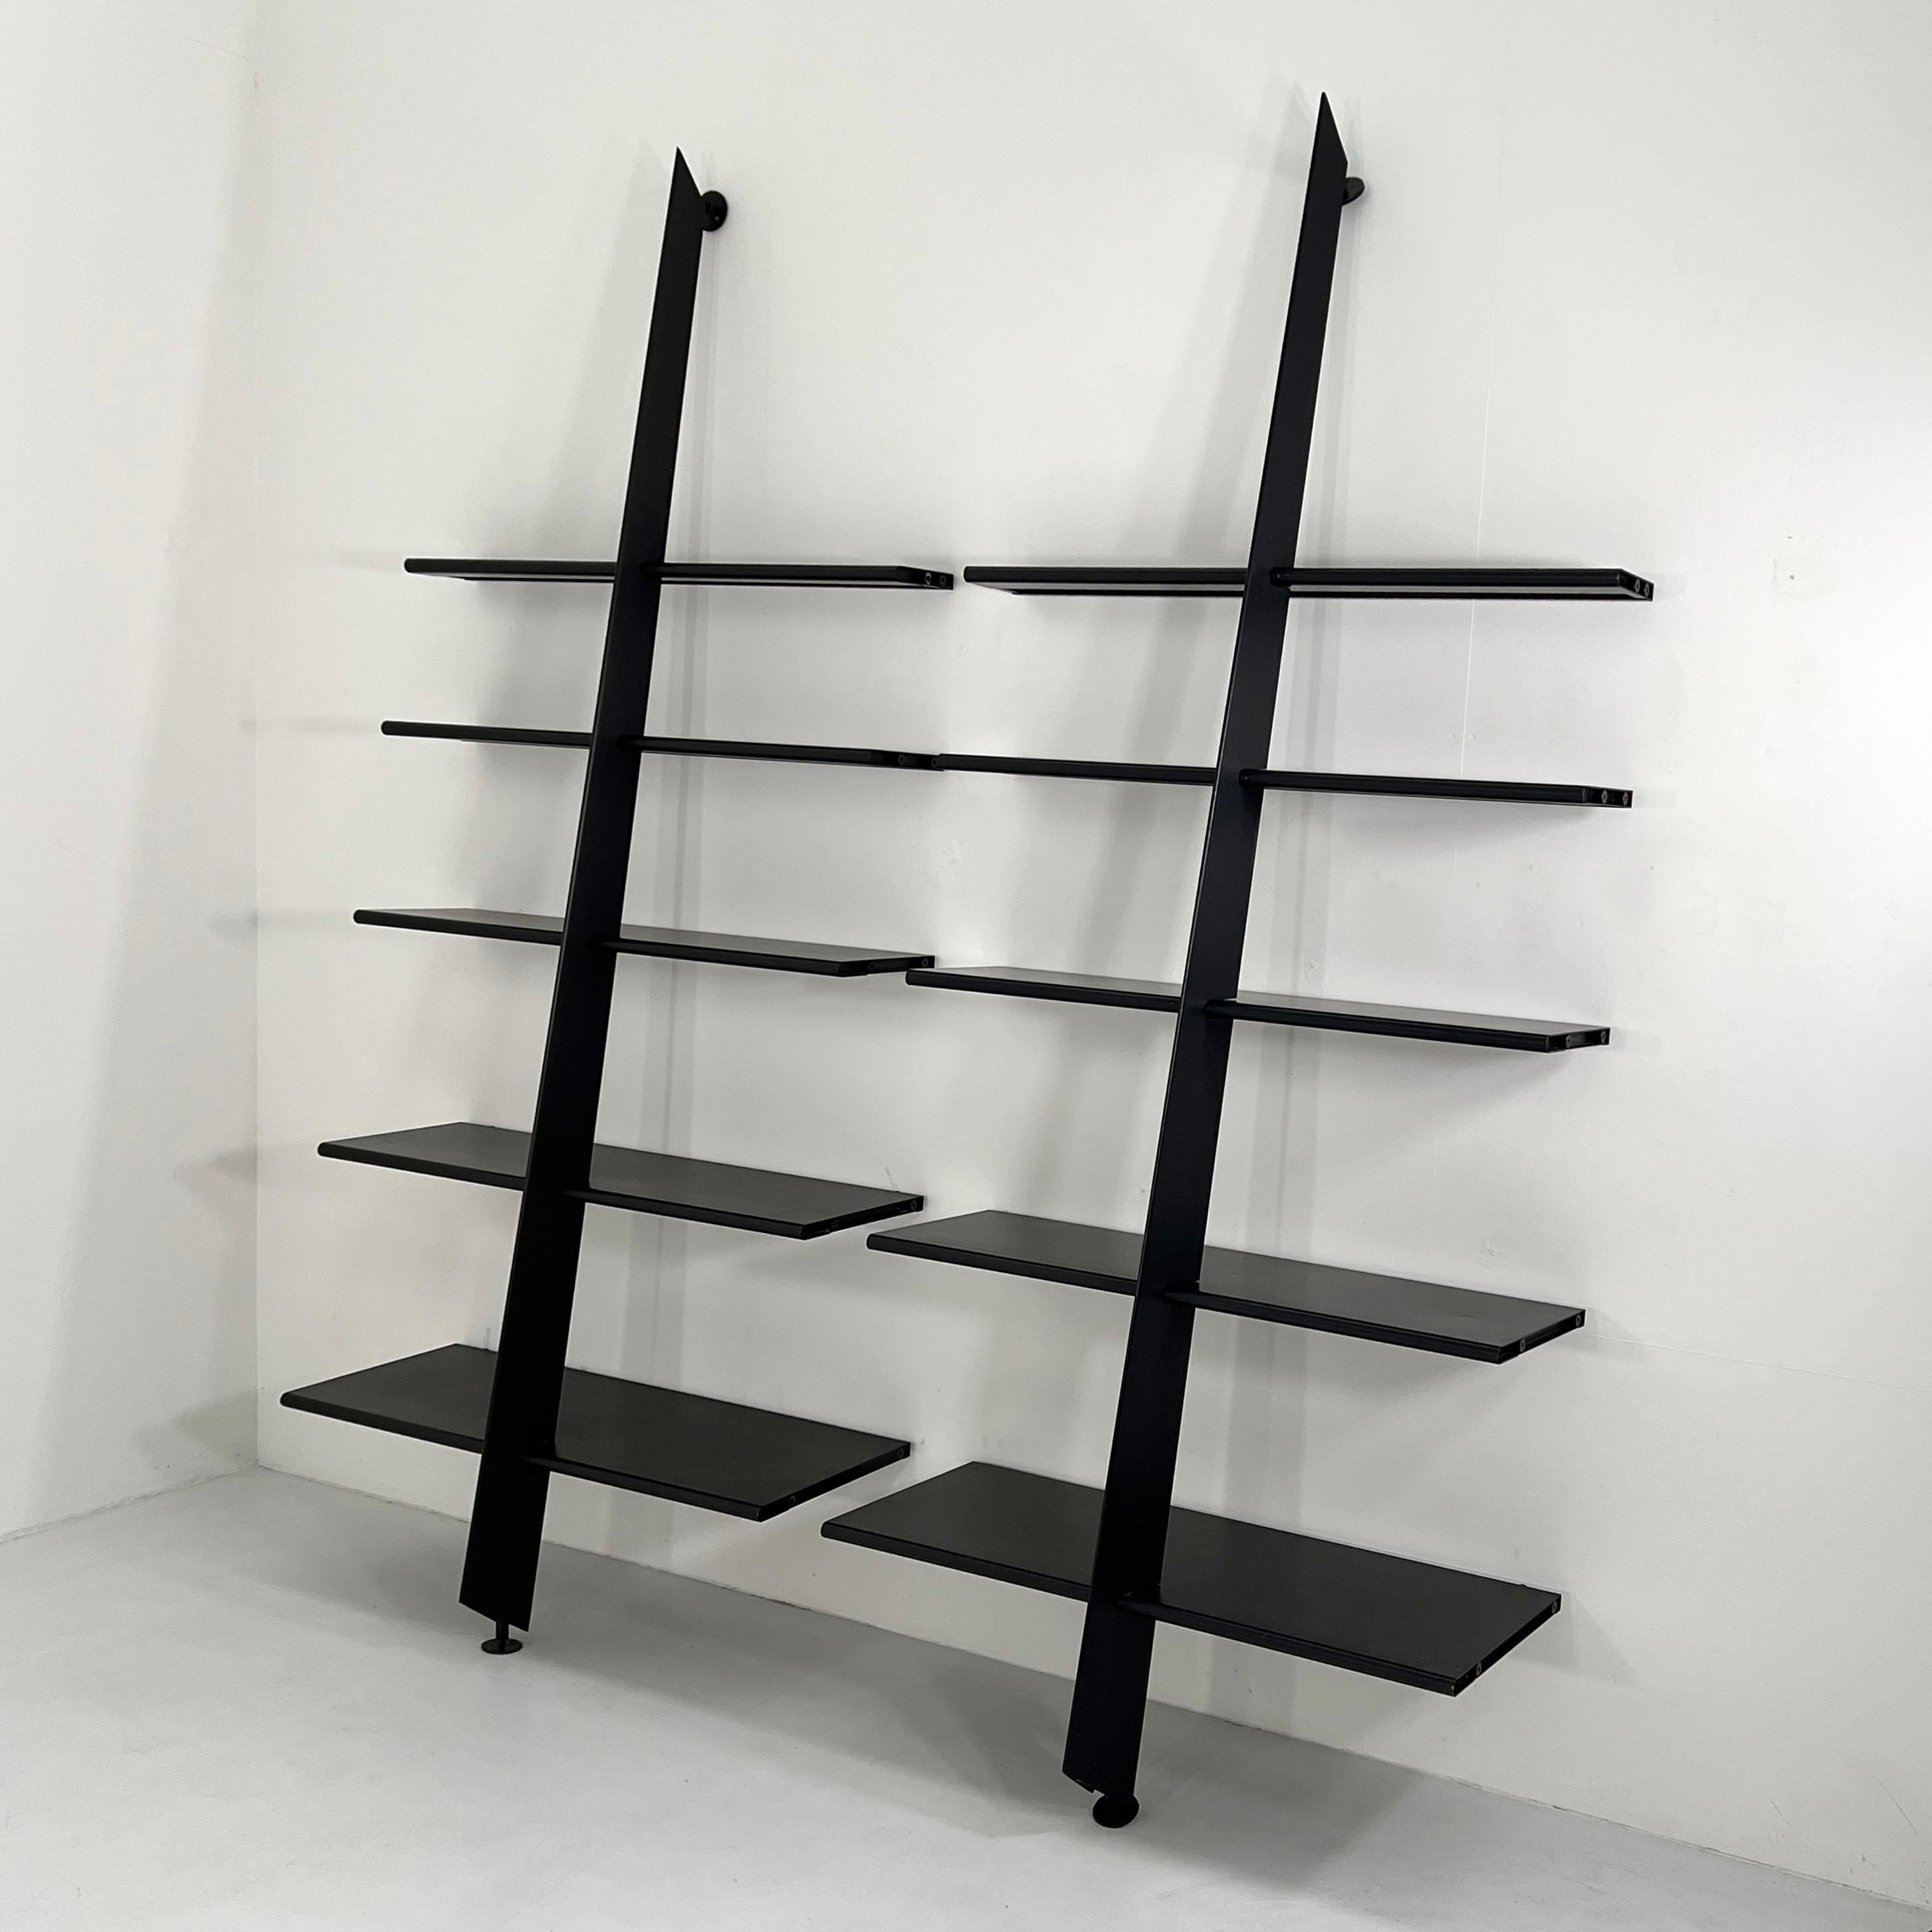 Black Mac Gee Wall Unit by Philippe Starck for Baleri Italia, 1980s For Sale 3